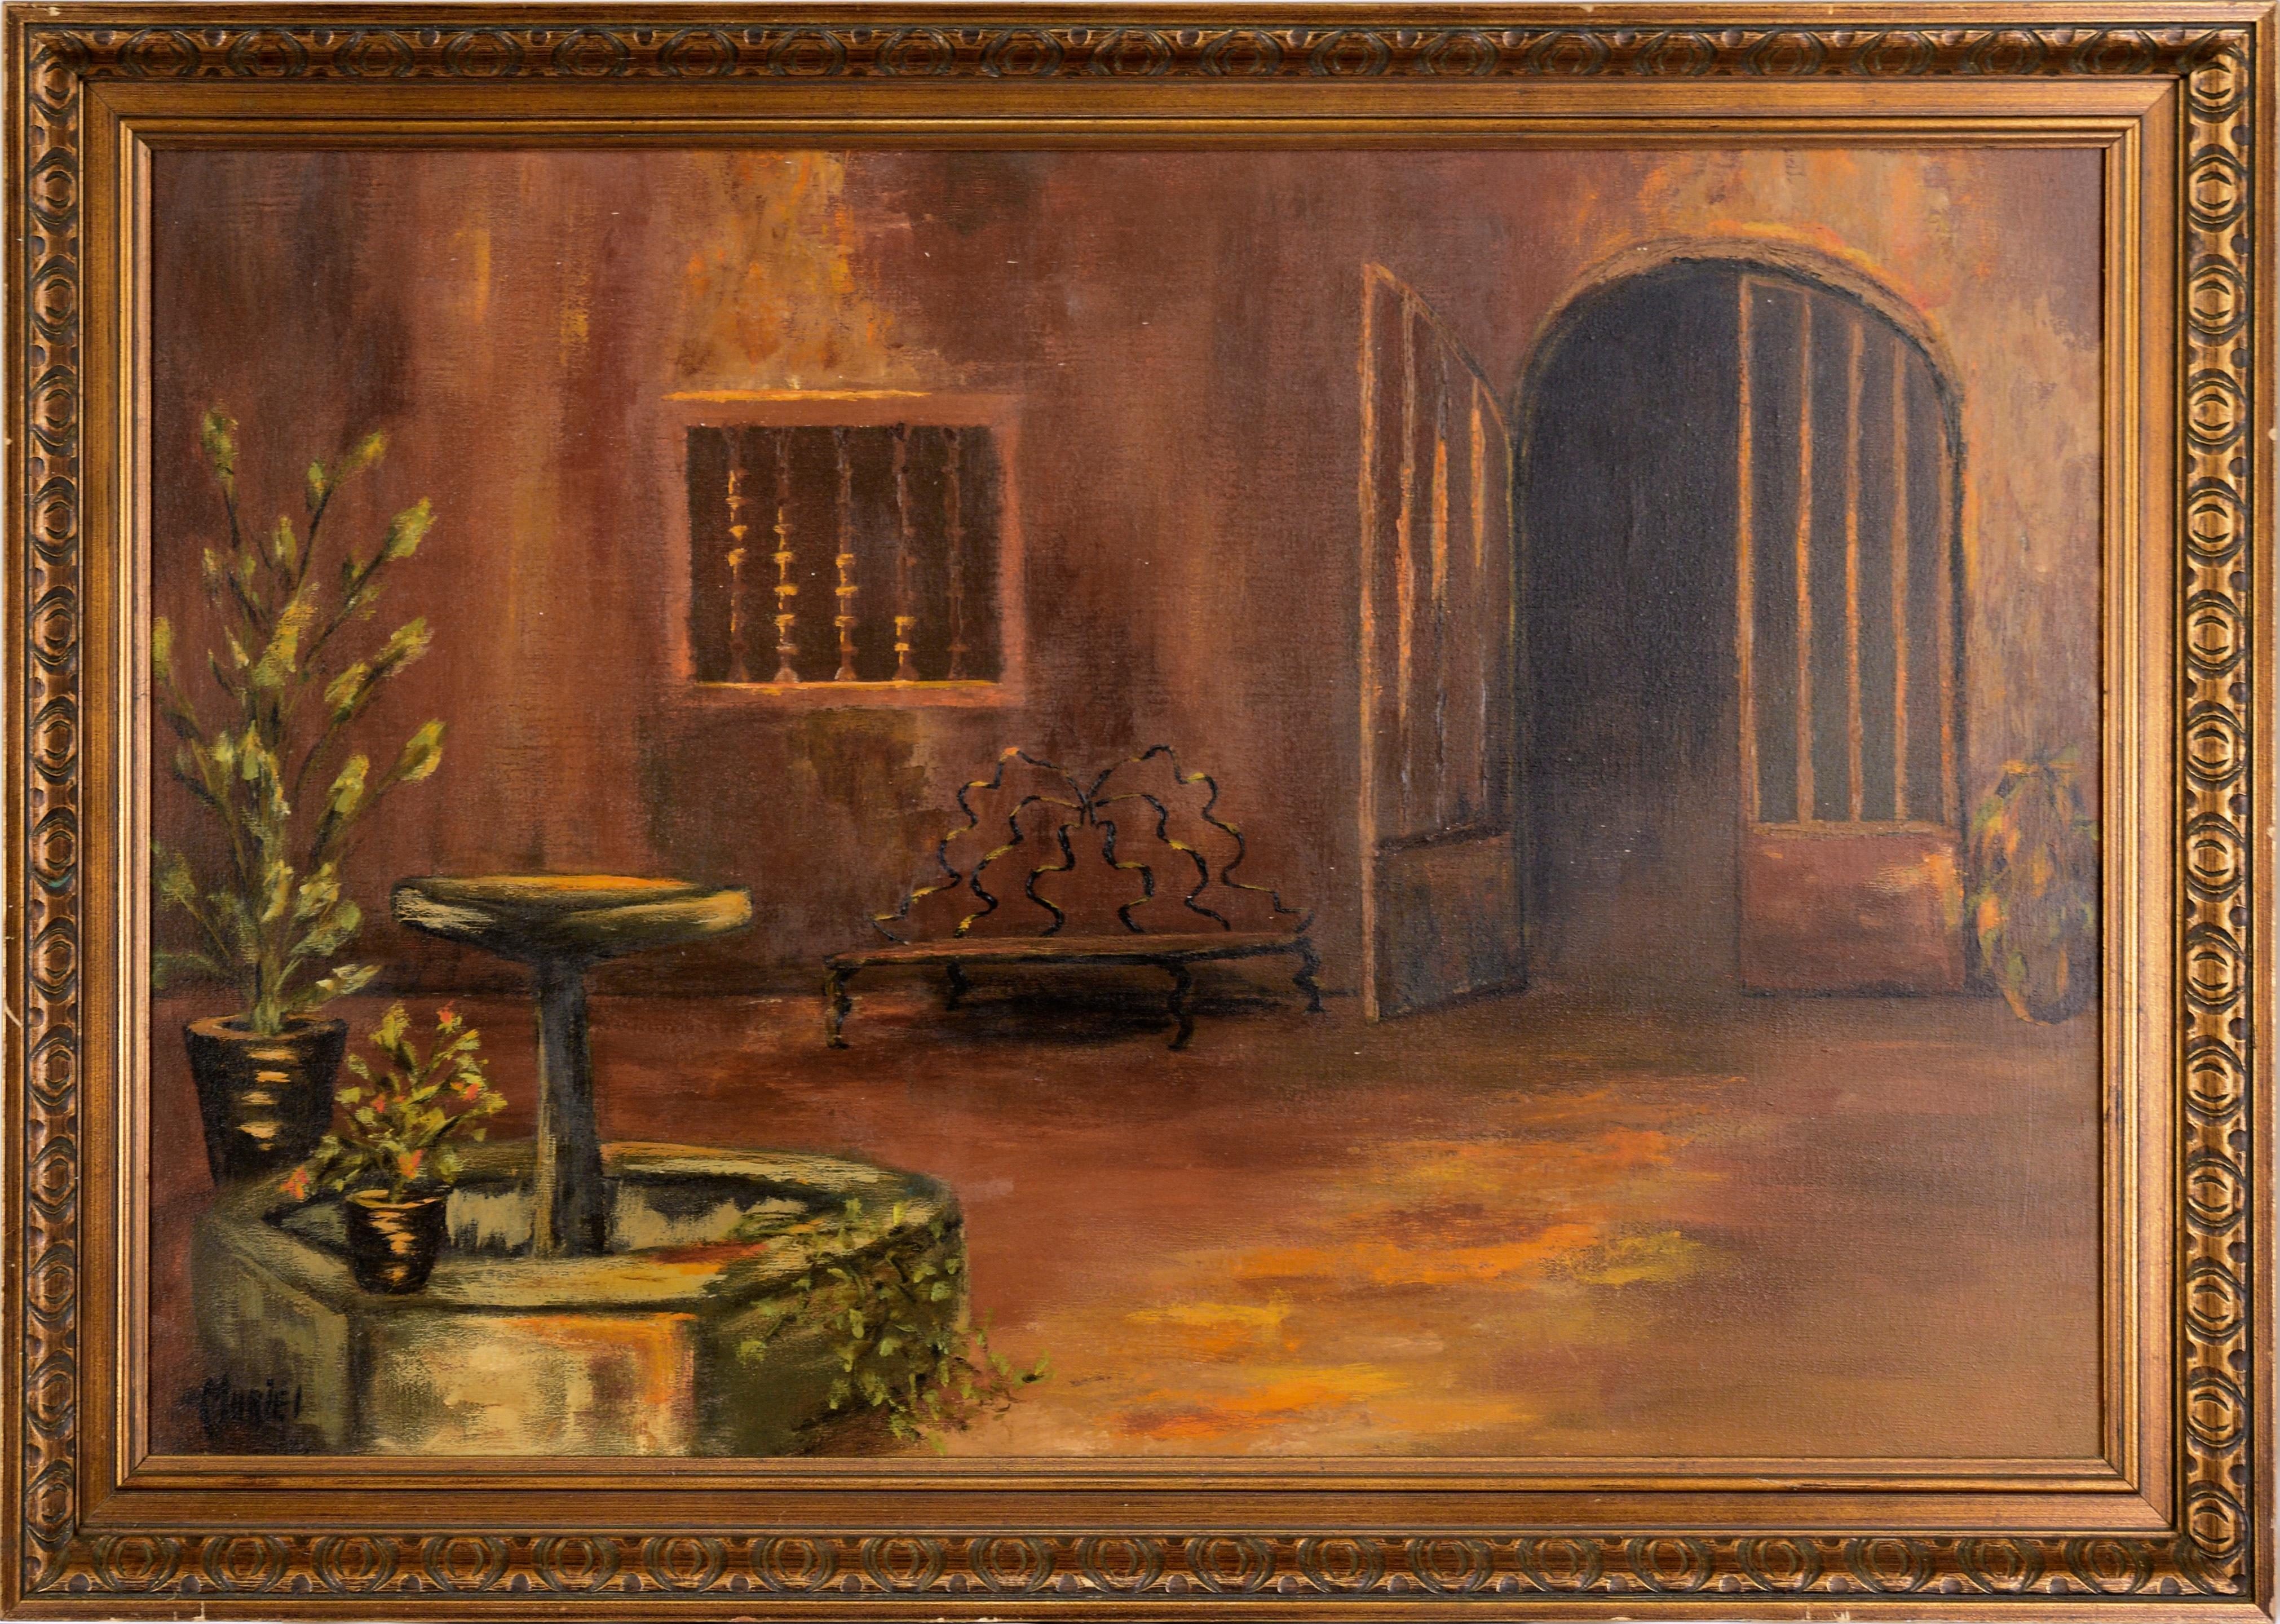 Muriel Kittock Interior Painting - Courtyard with Fountain - Interior Landscape in Oil on Canvas